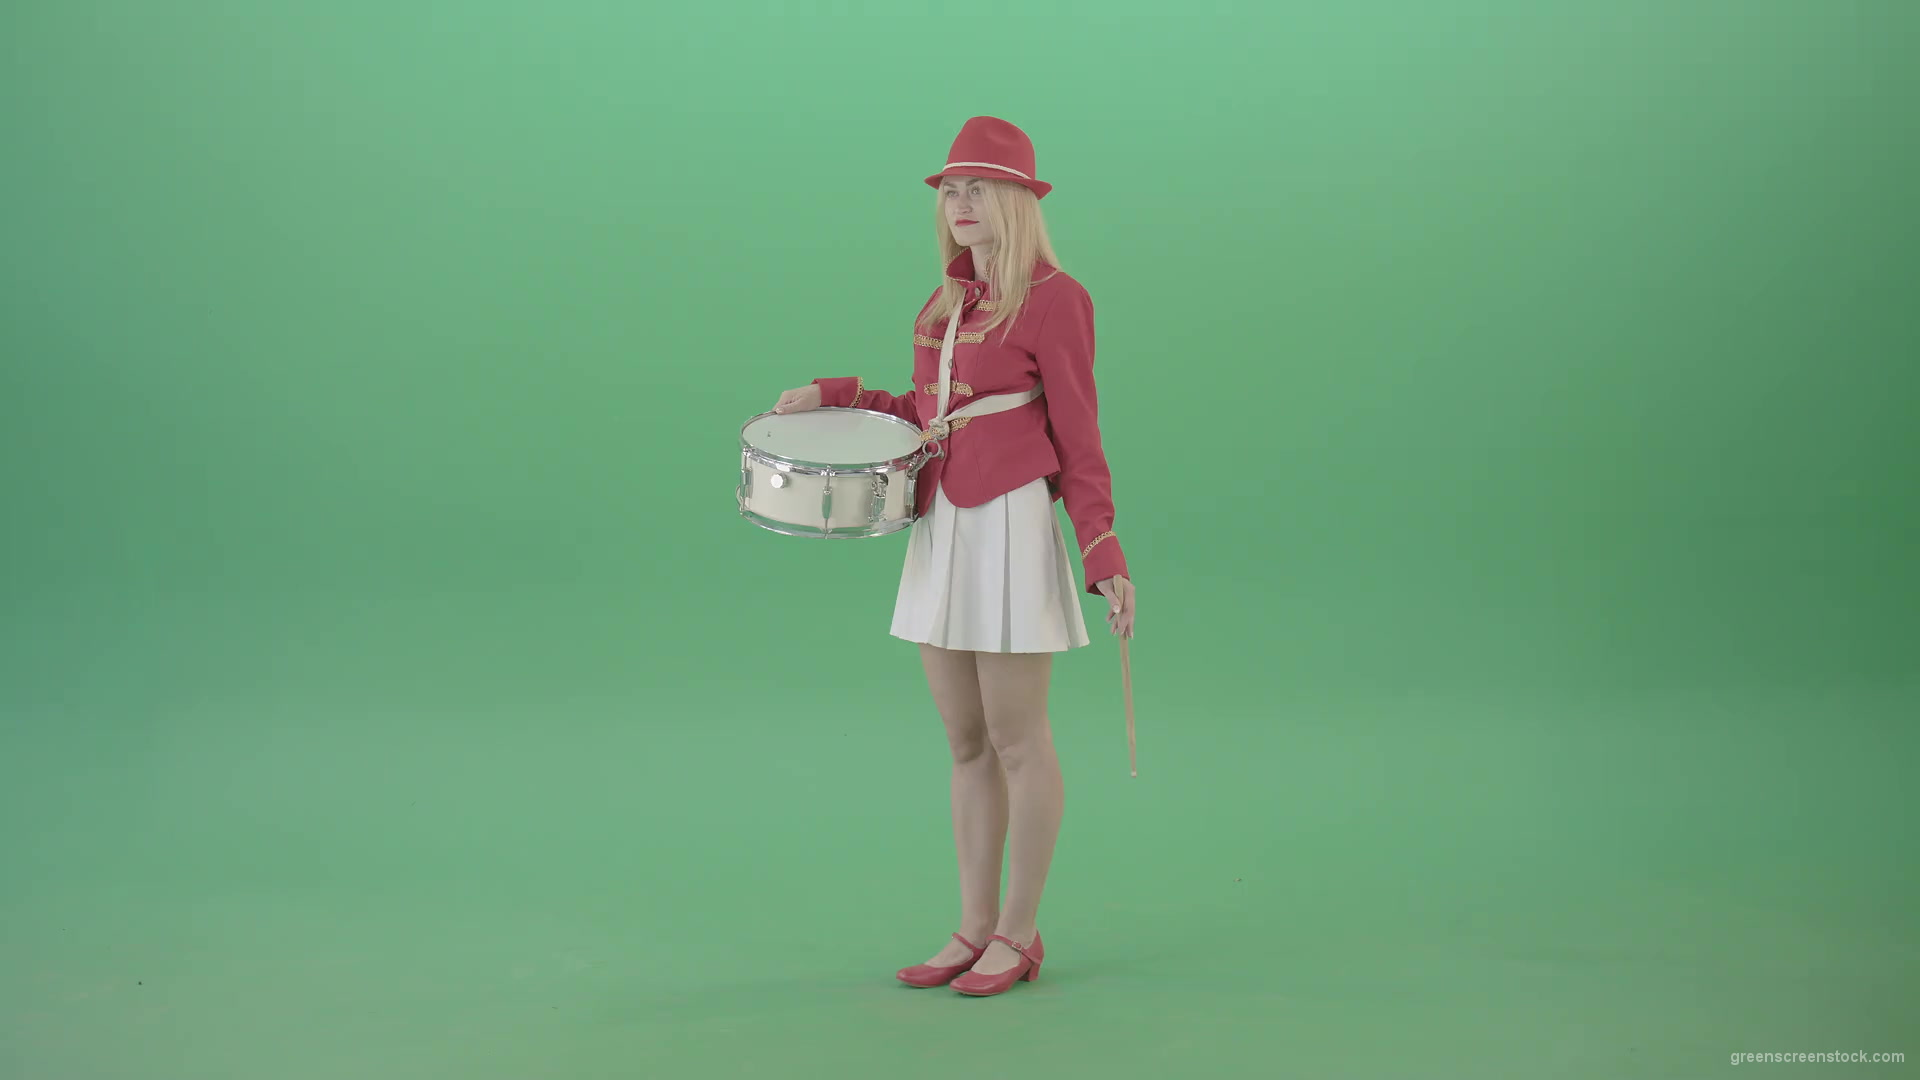 Girl-in-red-uniform-marching-and-play-snare-drum-on-green-screen-4K-Video-Footage-1920_001 Green Screen Stock